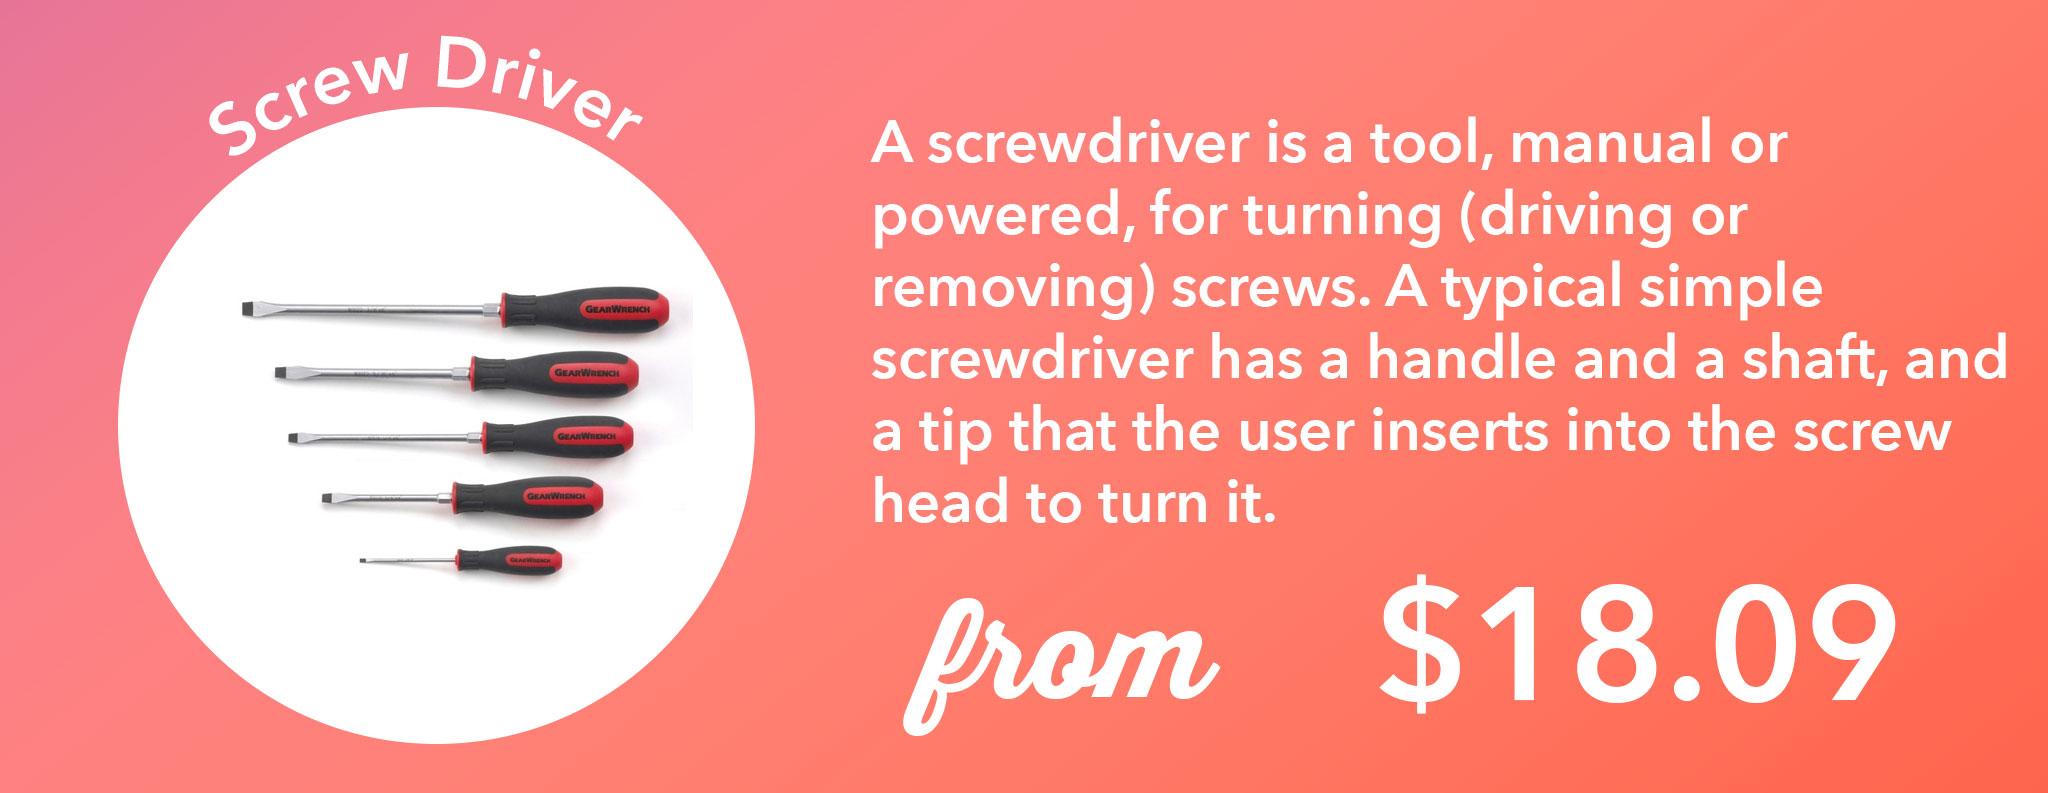 A screwdriver is a tool, manual or powered, for turning (driving or removing) screws. A typical simple screwdriver has a handle and a shaft, and a tip that the user inserts into the screw head to turn it.